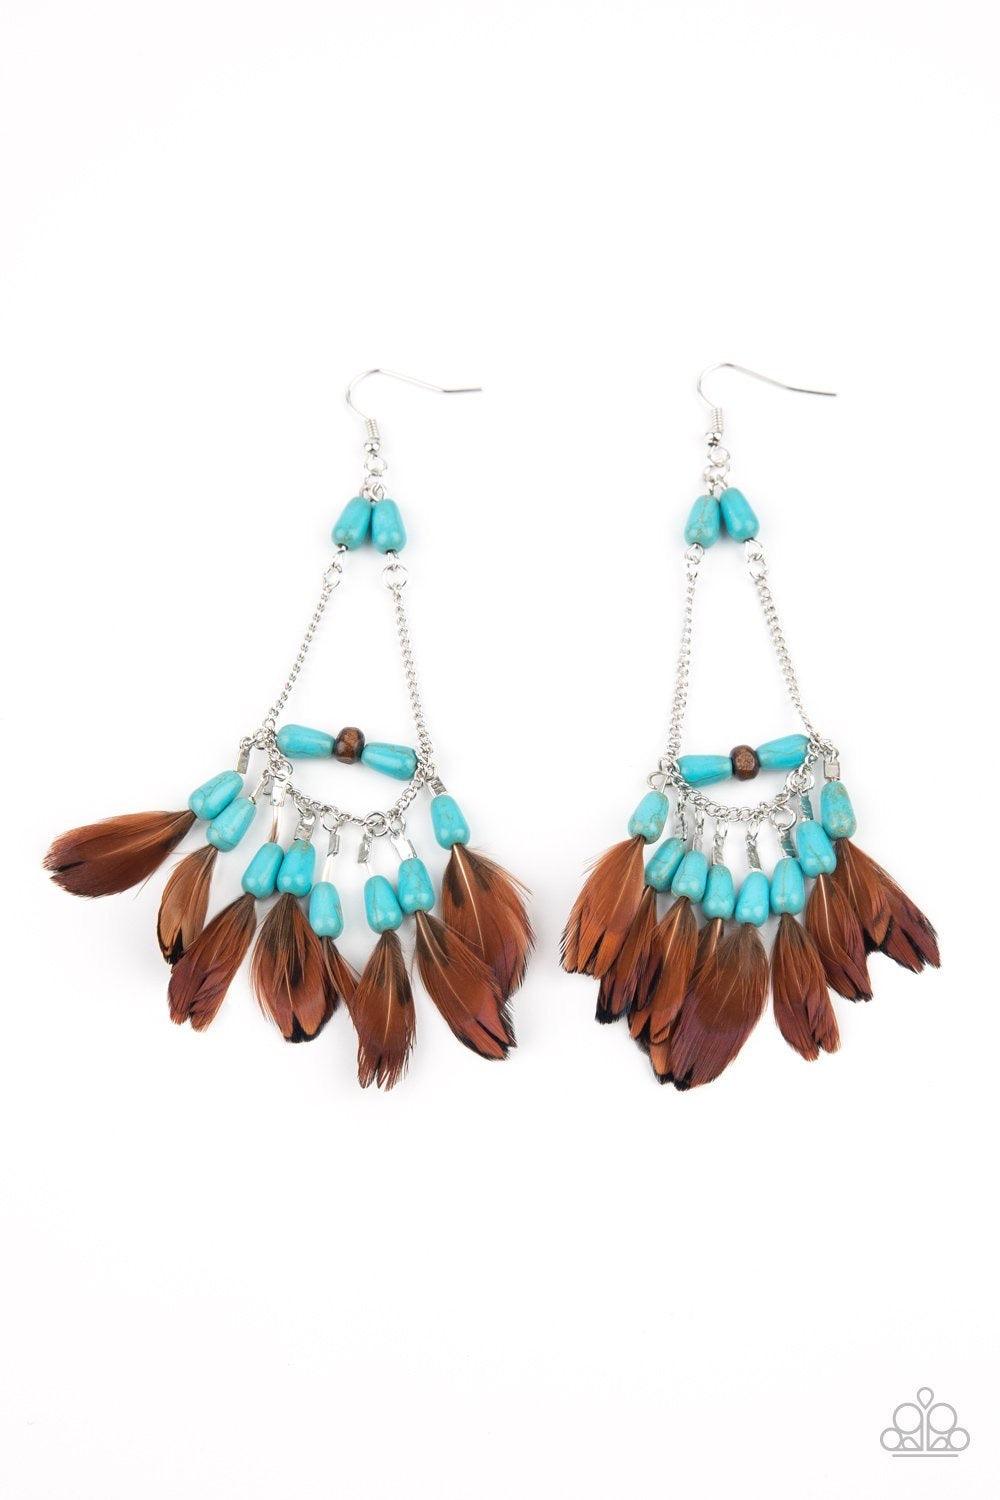 Paparazzi Accessories Haute Hawk - Blue Infused with a wooden accent, an earthy assortment of teardrop turquoise stone beads and dainty brown feathers create a free-spirited fringe at the bottom of a shimmery silver chain teardrop for a wildly wonderful f